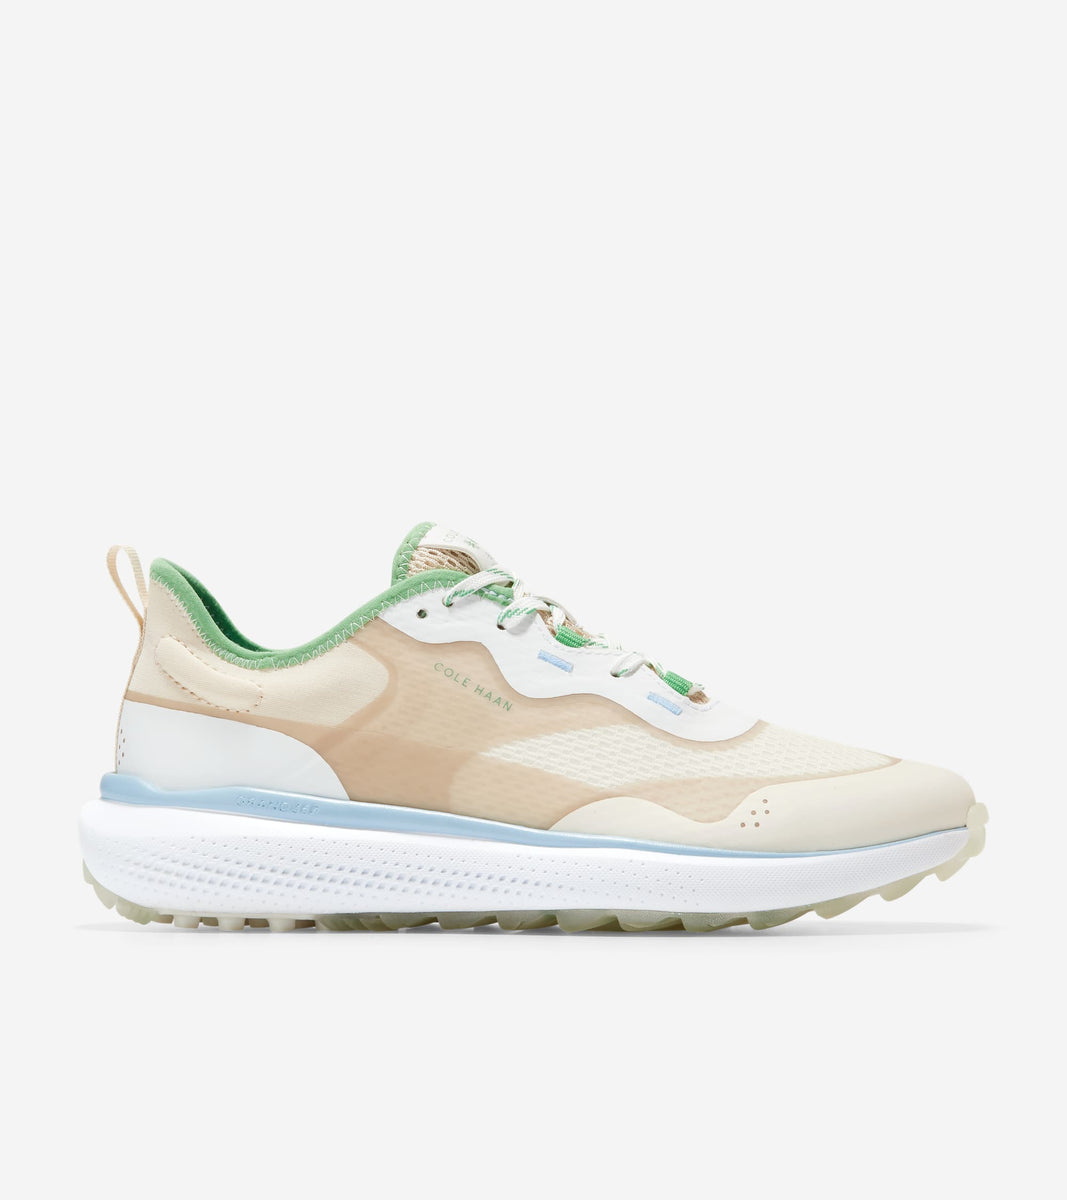 W29018:IVORY/BLEACHED SAND/BLUE BELL/GREENBRIAR/WHITE